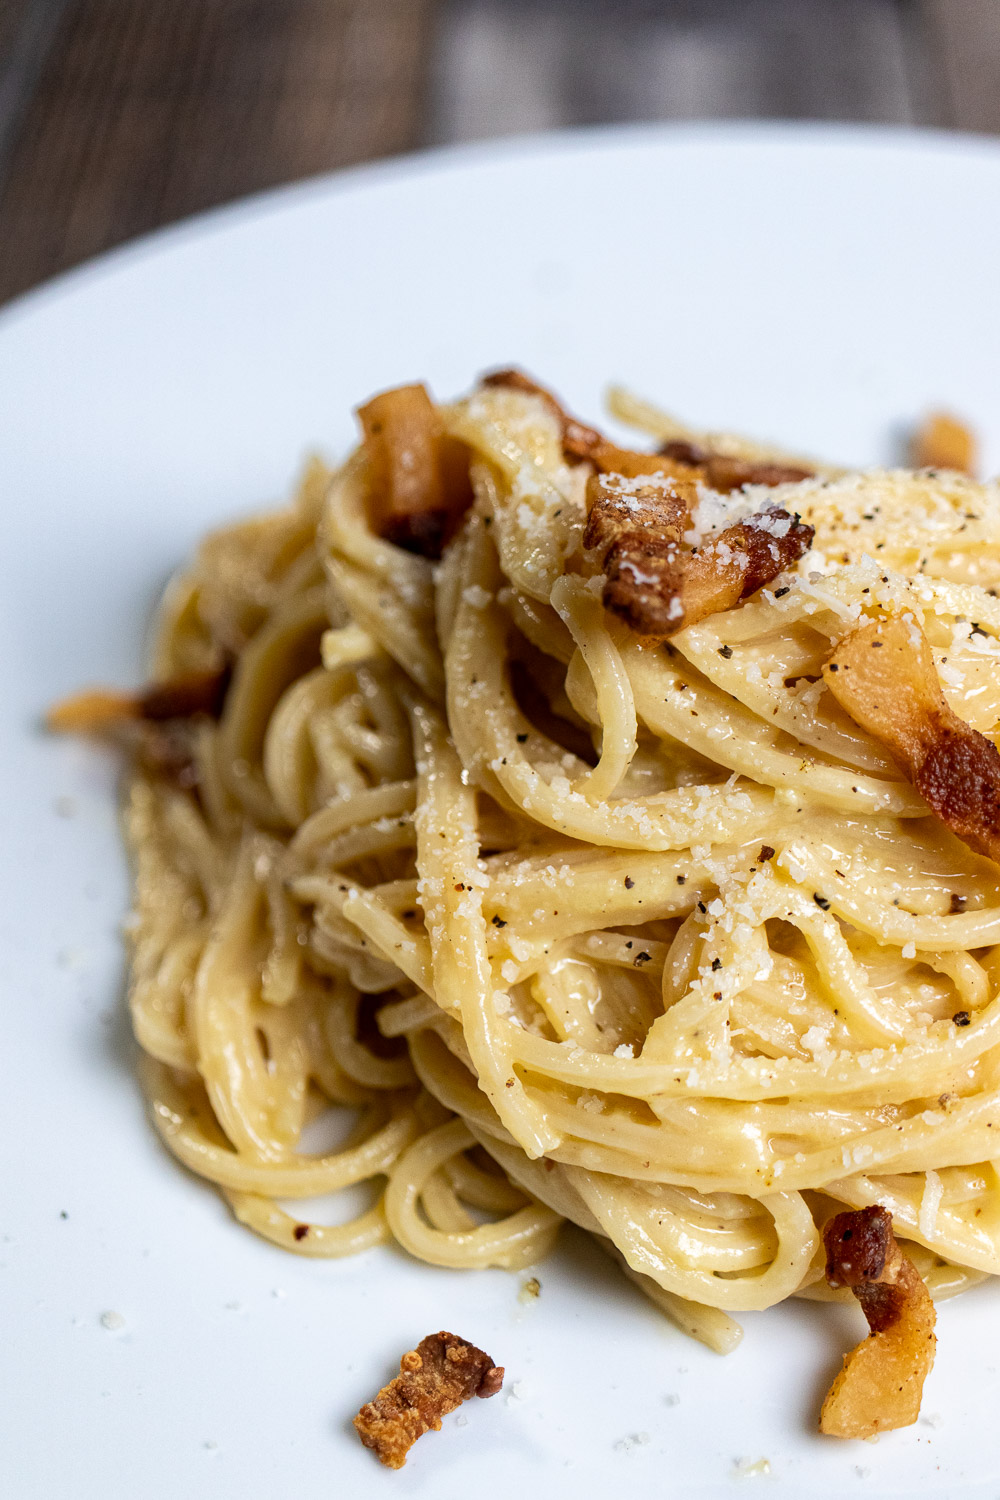 Authentic spaghetti carbonara made with guanciale and Pecorino Romano cheese on a white plate.